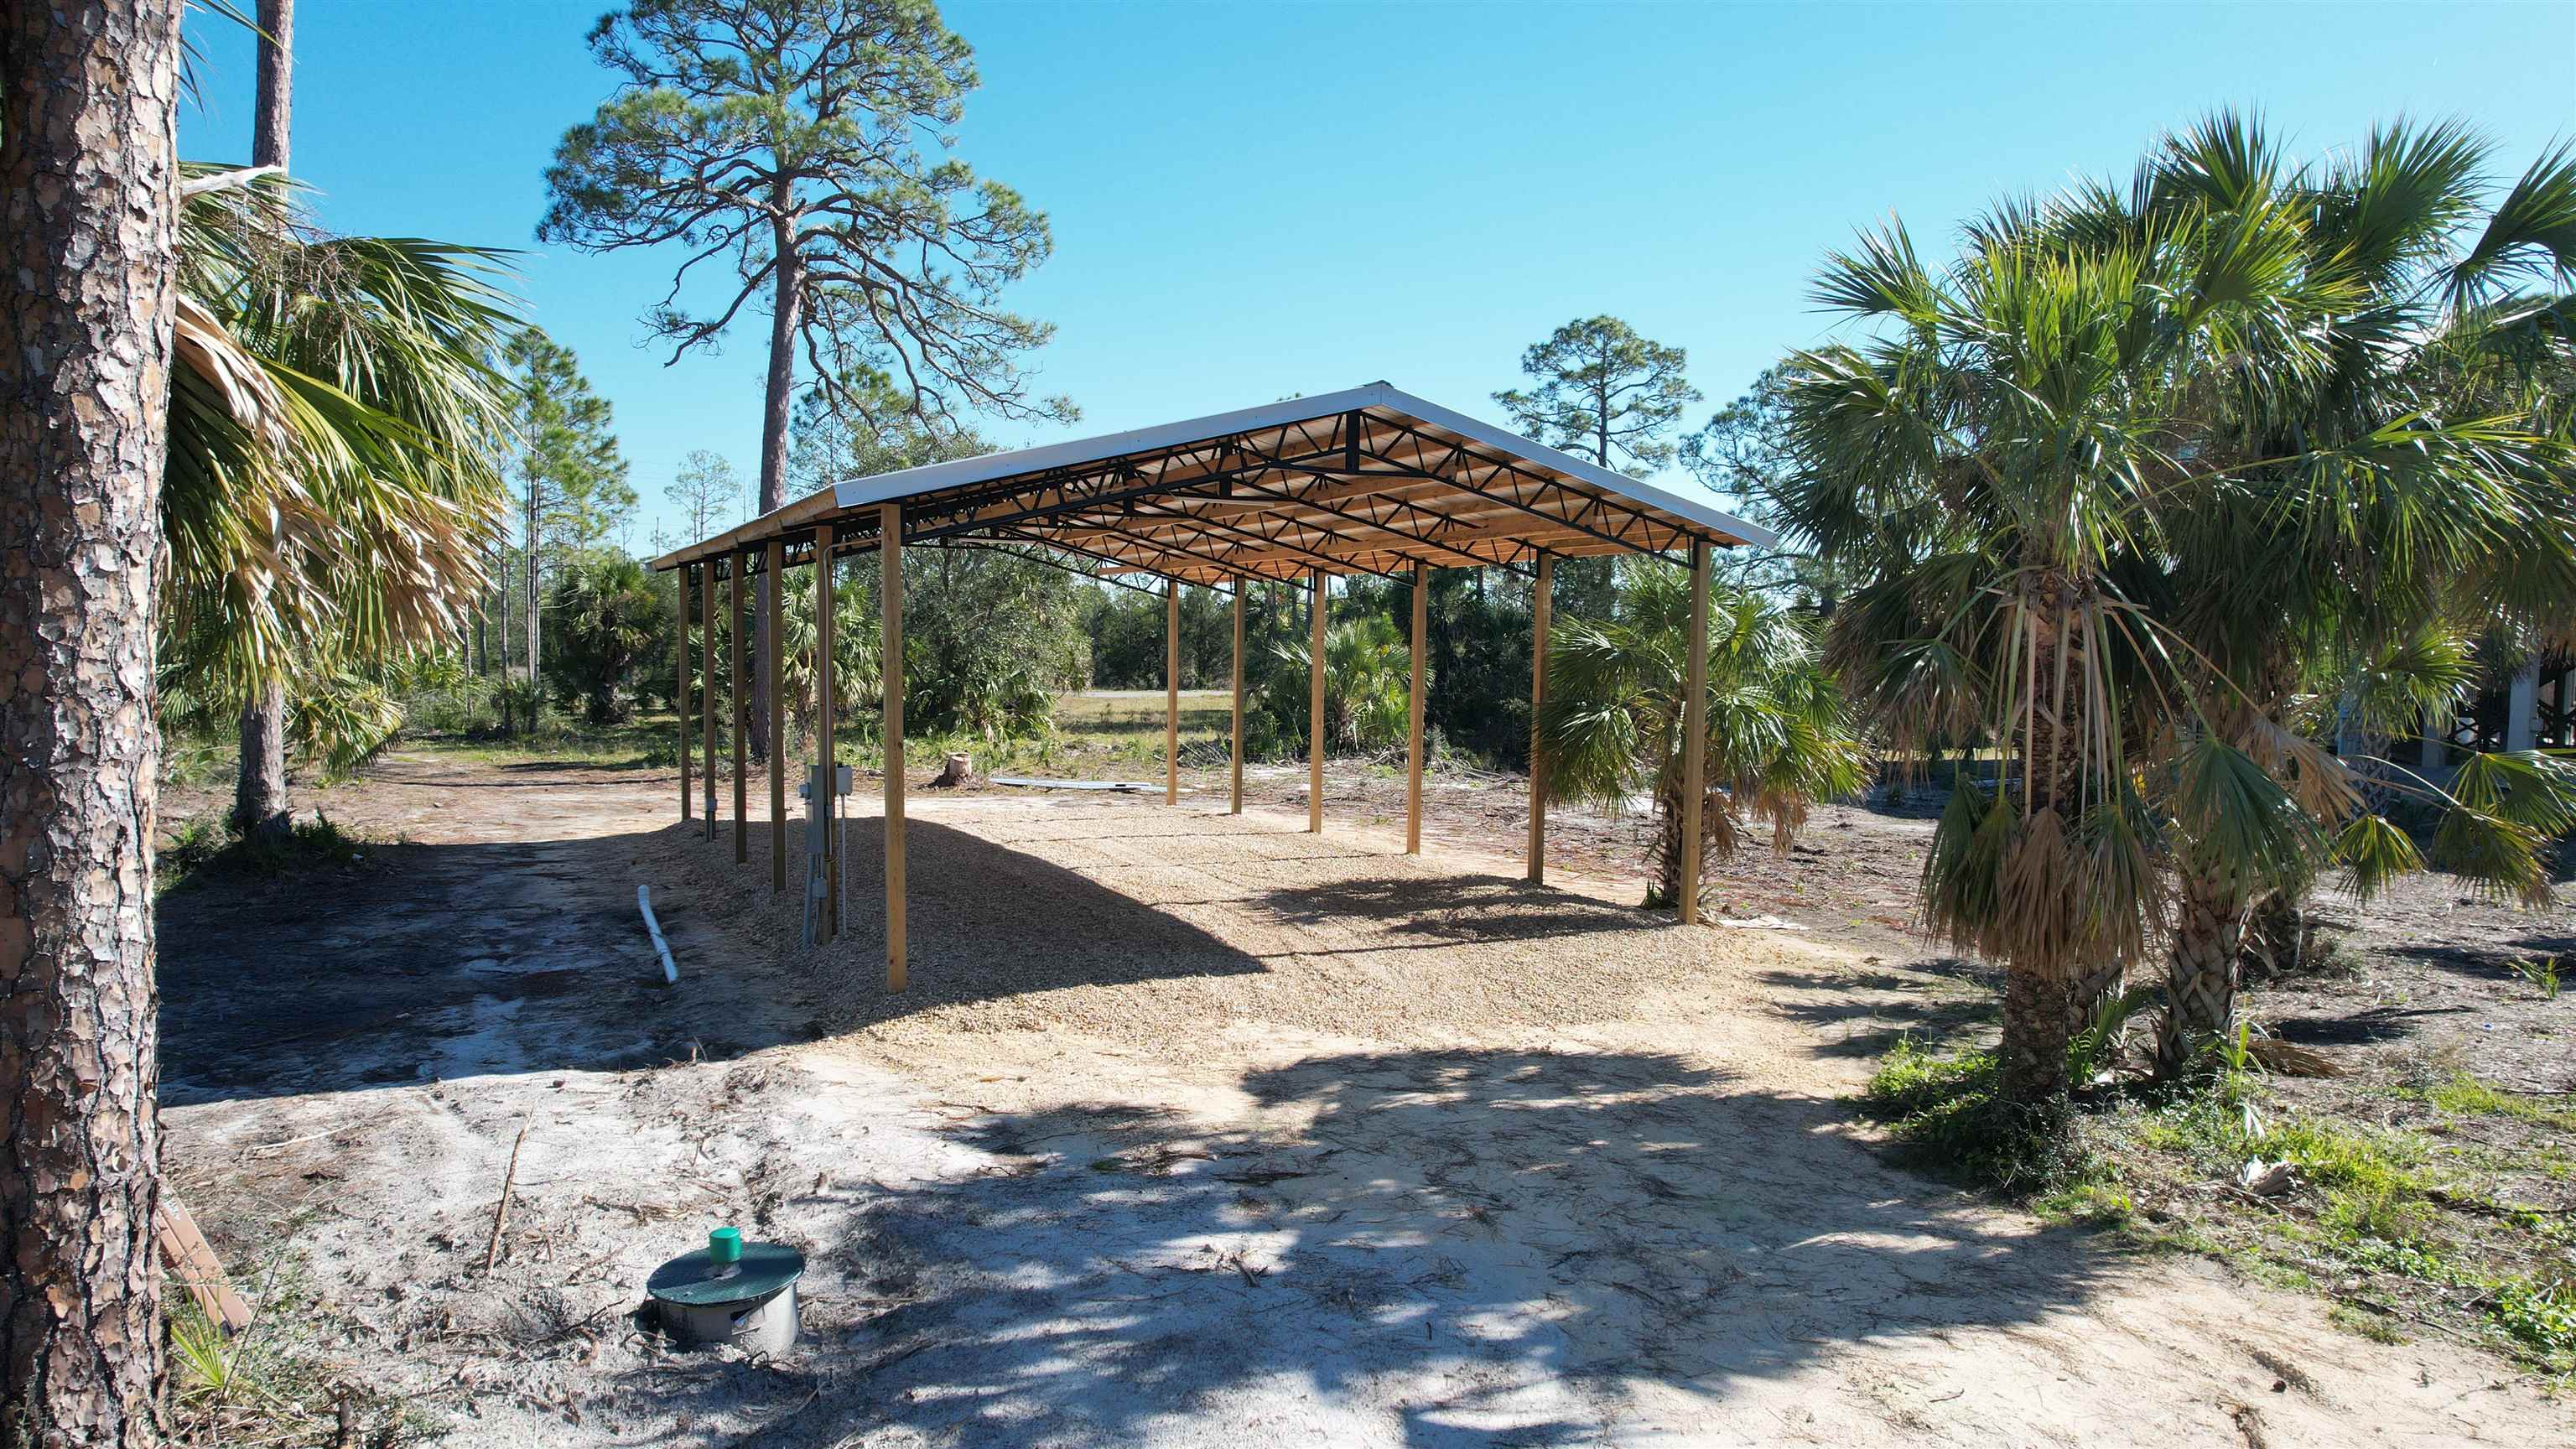 21420 Osprey,PERRY,Florida 32348,Lots and land,Osprey,366386